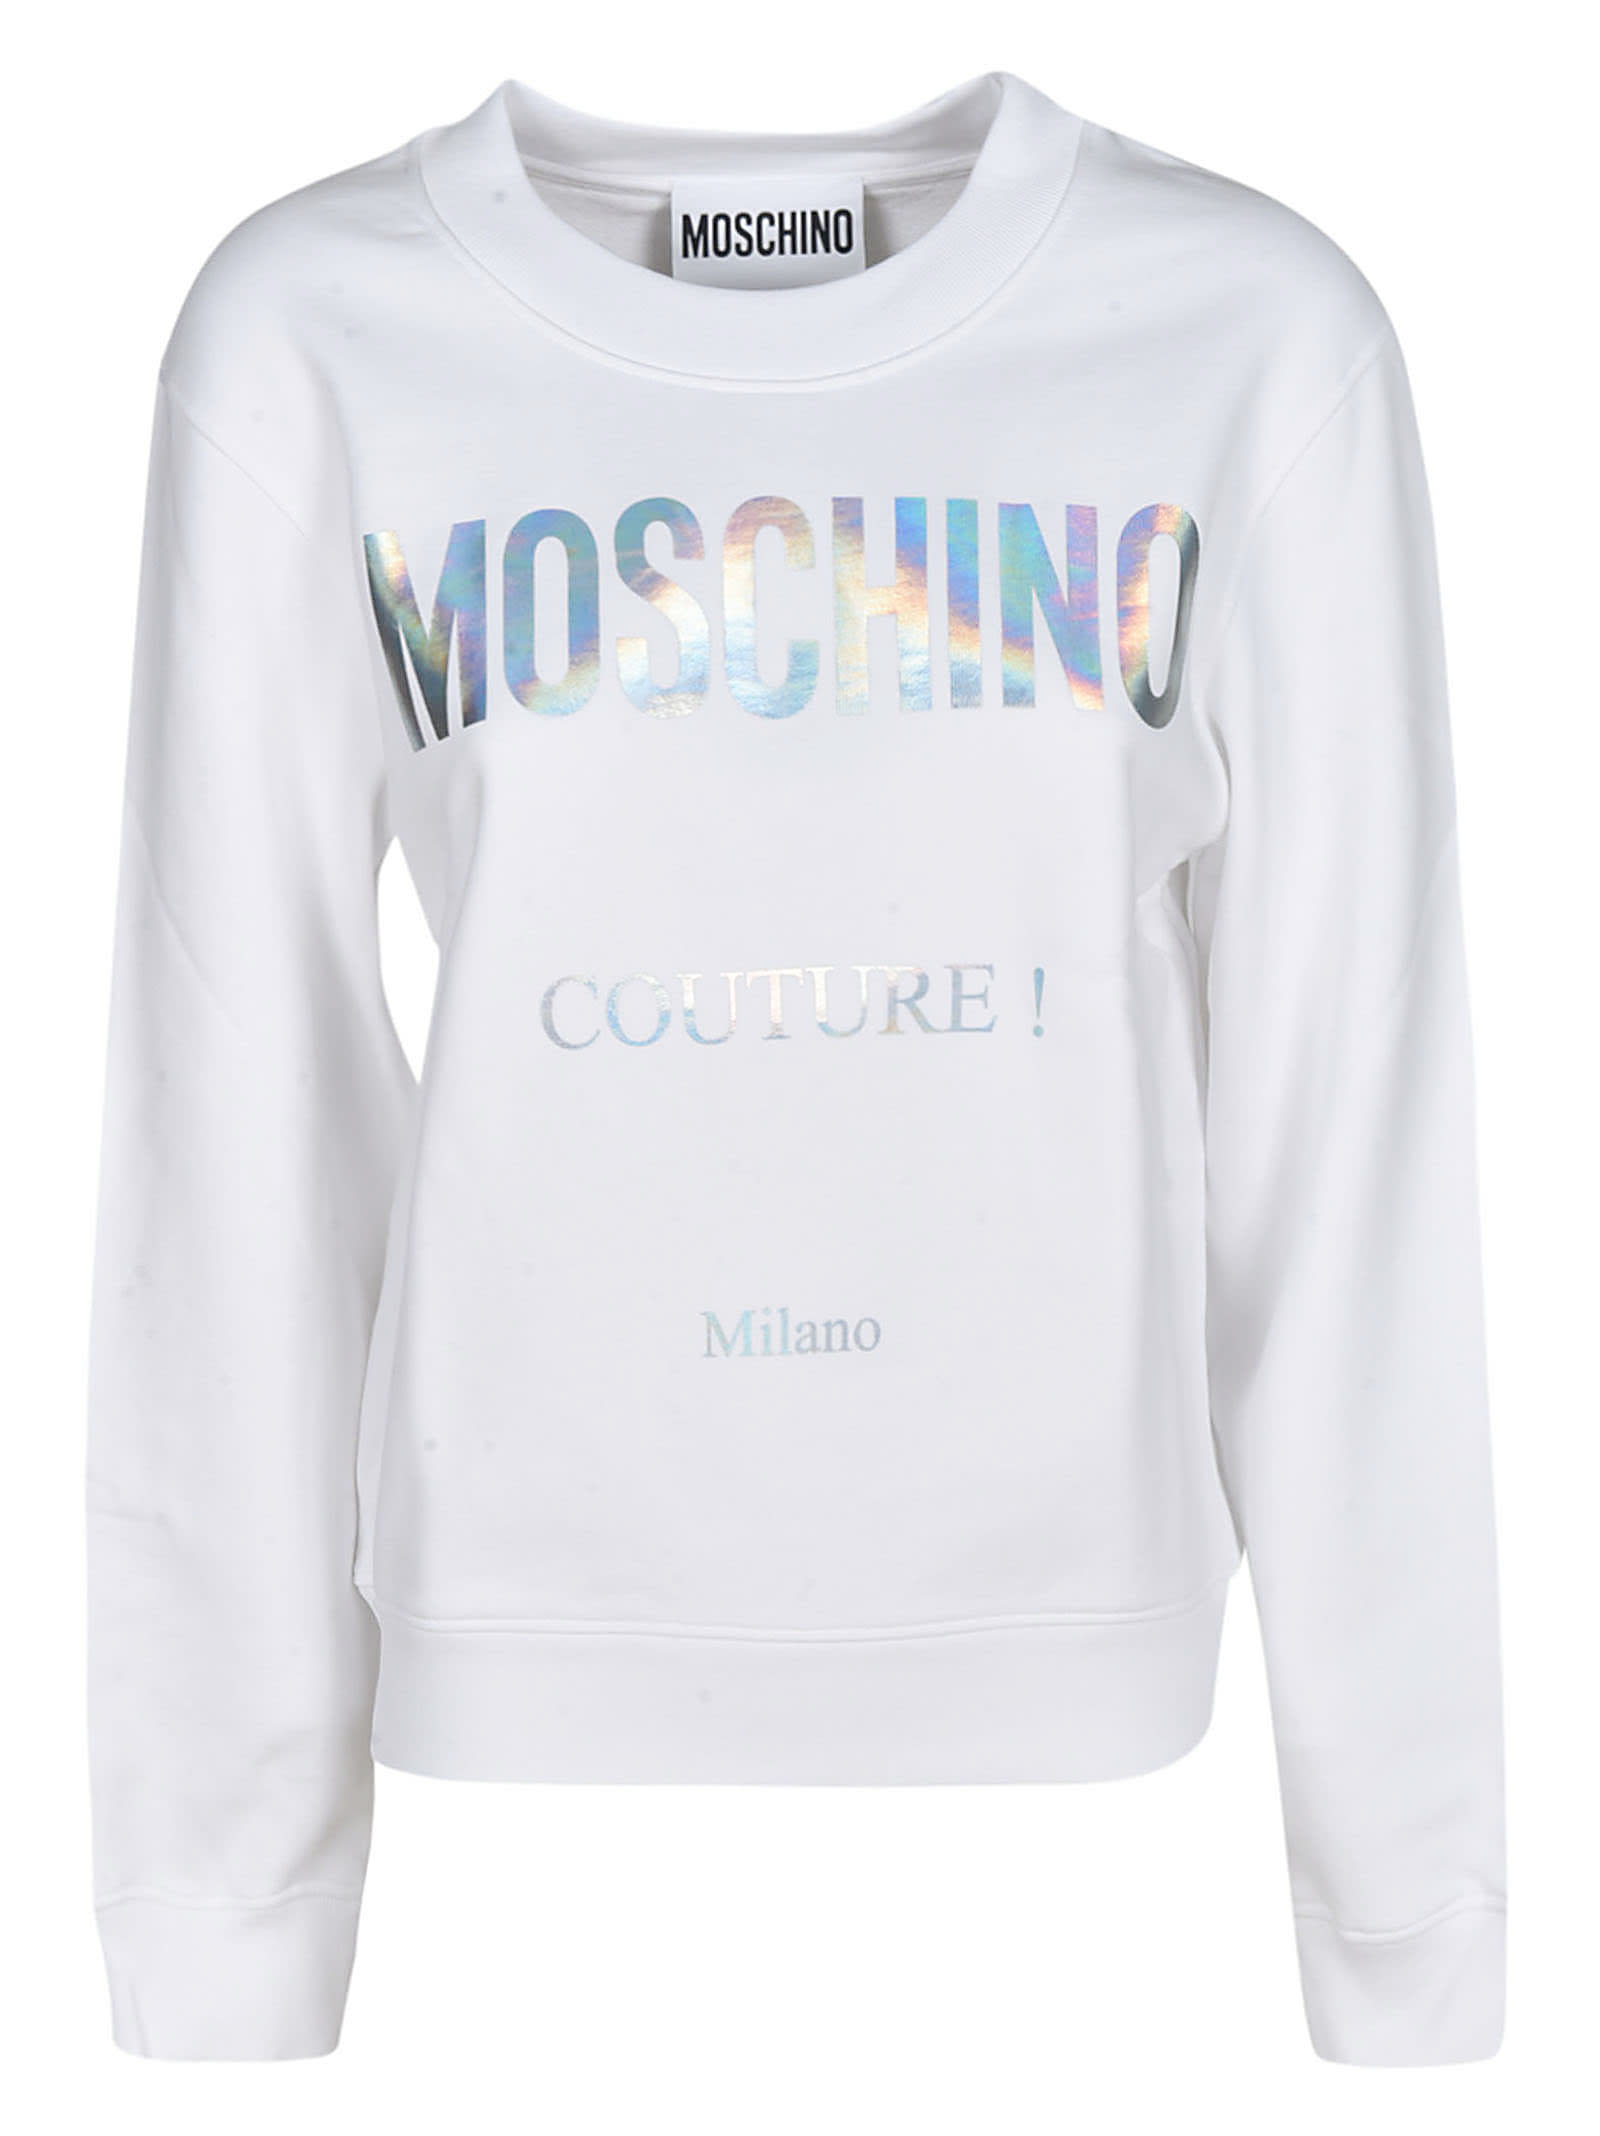 MOSCHINO COUTURE SWEATER,J1704 5527 1001